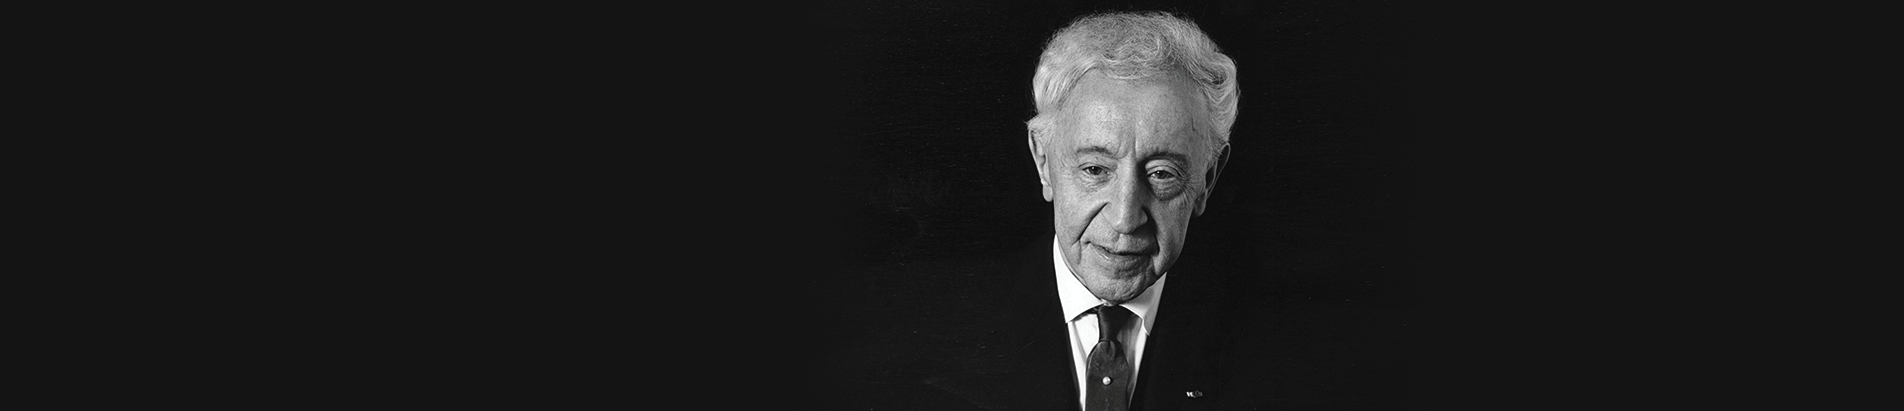 Arthur Rubinstein International Piano Master Competition on : Past  Prize-Winners 